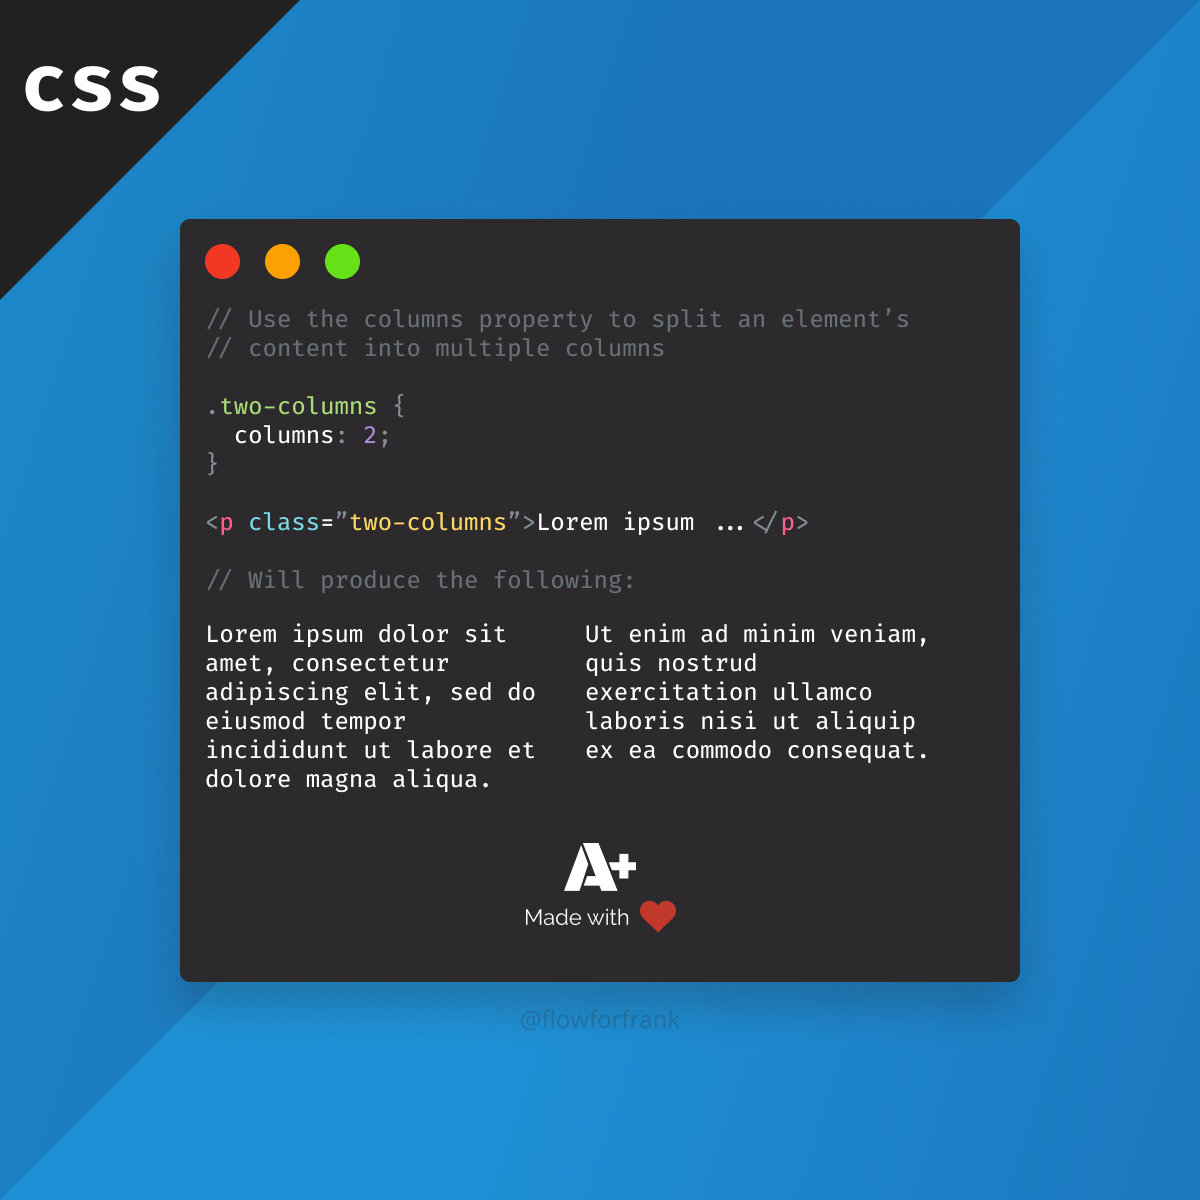 How to create two columns in CSS